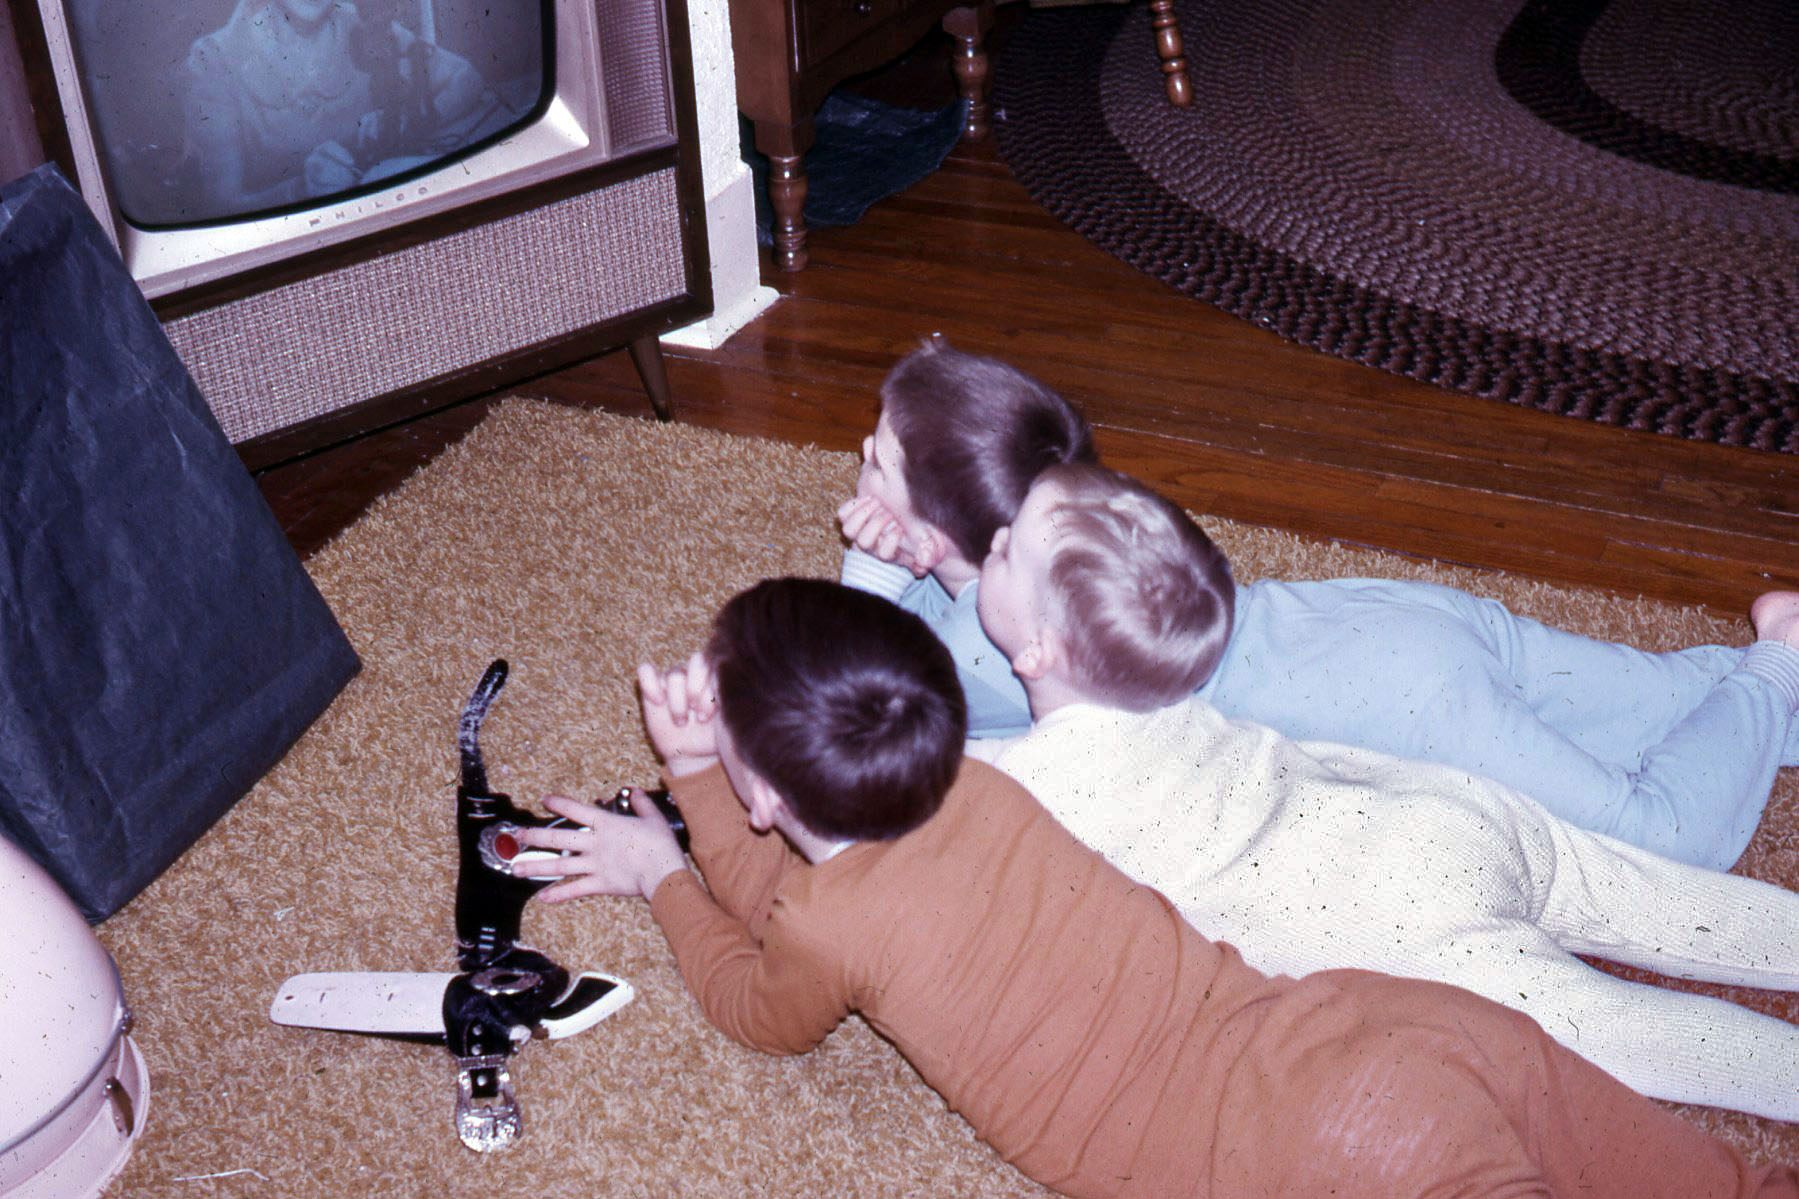 January 1969 in Rochester, Indiana. If you can figure out what movie or TV show that is, I'll give you a cookie. I'm stumped. From a Kodachrome slide. View full size.